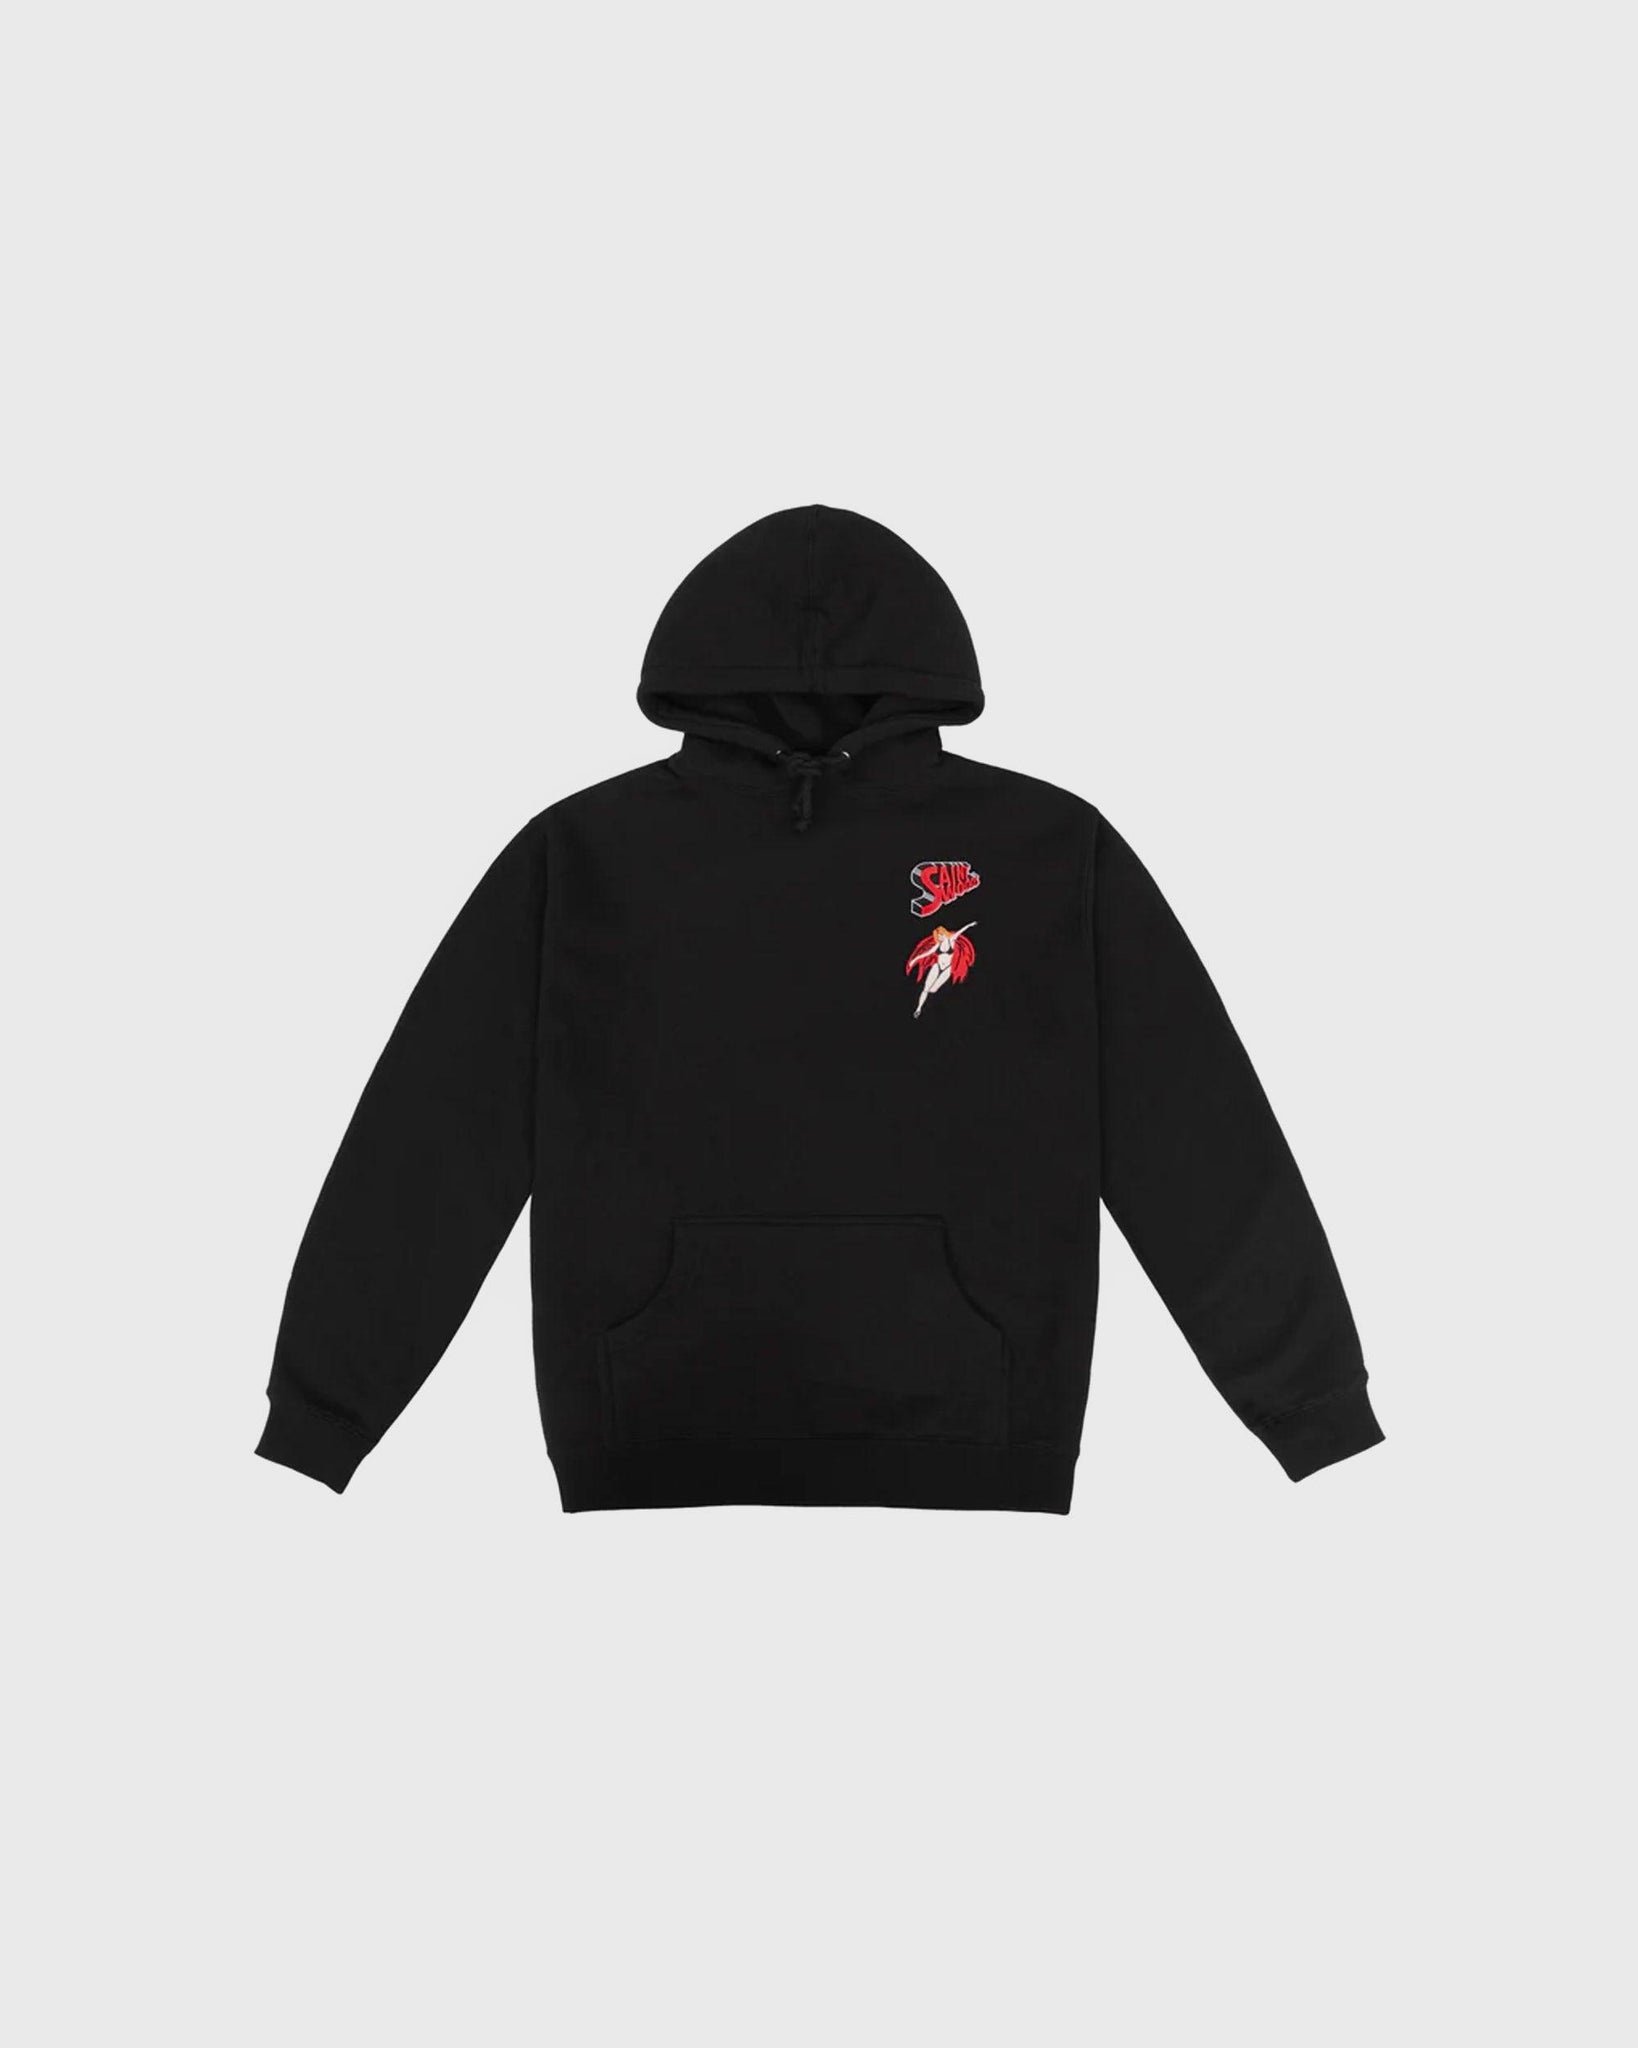 Super SW Hoodie Black - {{ collection.title }} - Chinatown Country Club 